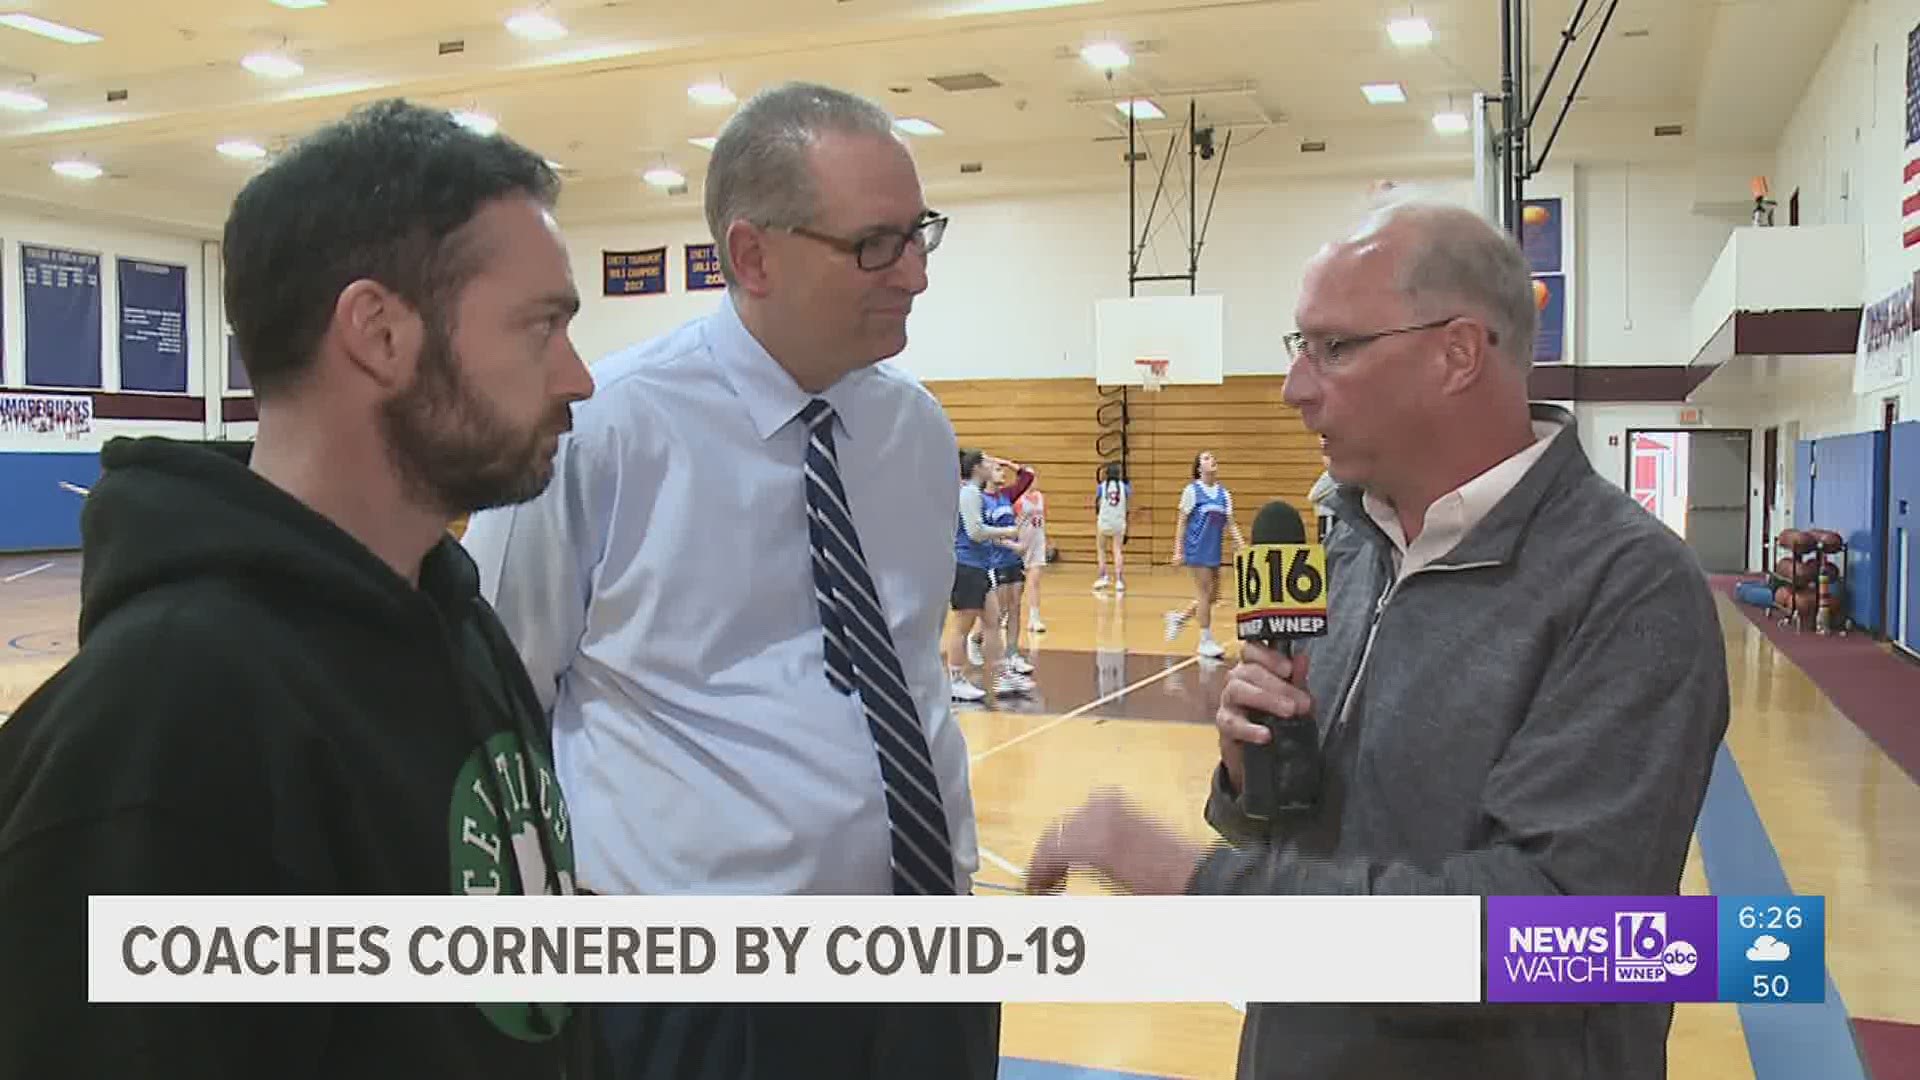 Coaches Cornered by Coronavirus.  Scranton Prep and Dunmore girls state championship run in HS basketball suspended to due Covid-19.